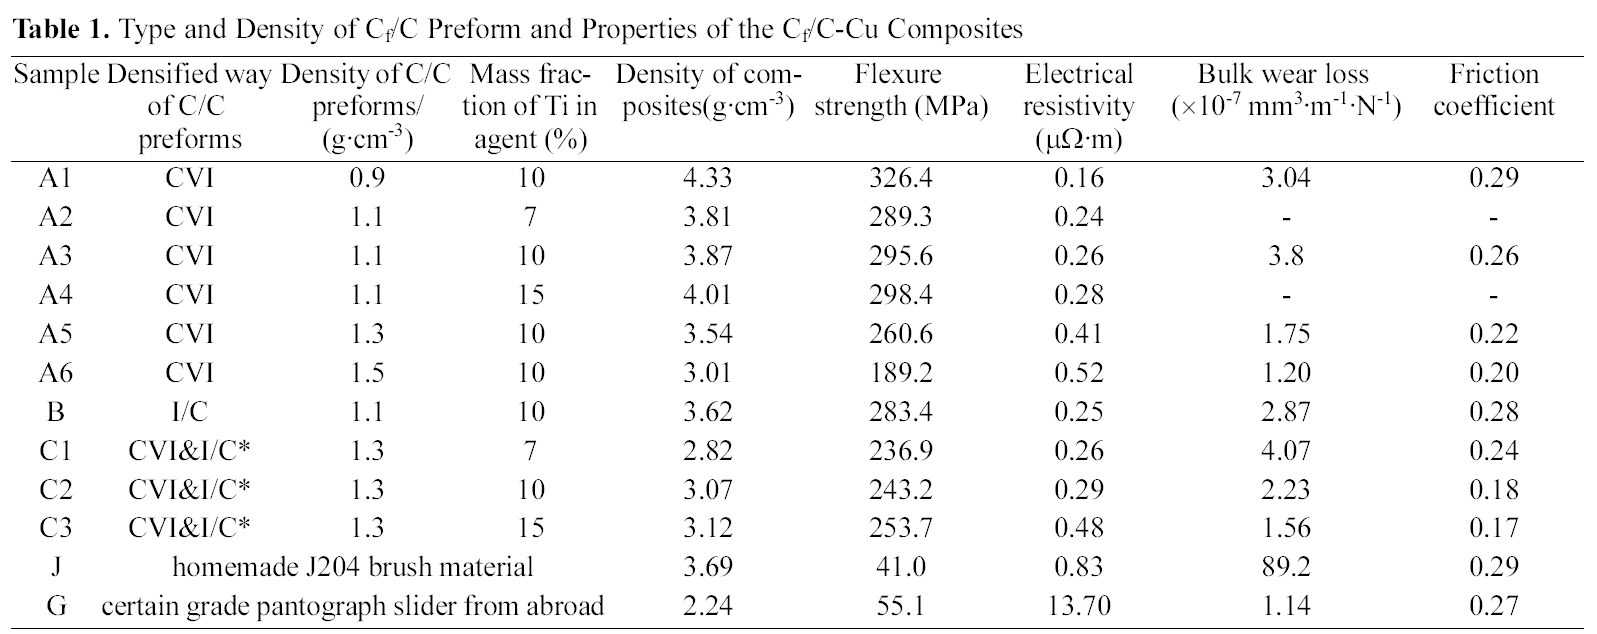 Type and Density of Cf/C Preform and Properties of the Cf/C-Cu Composites